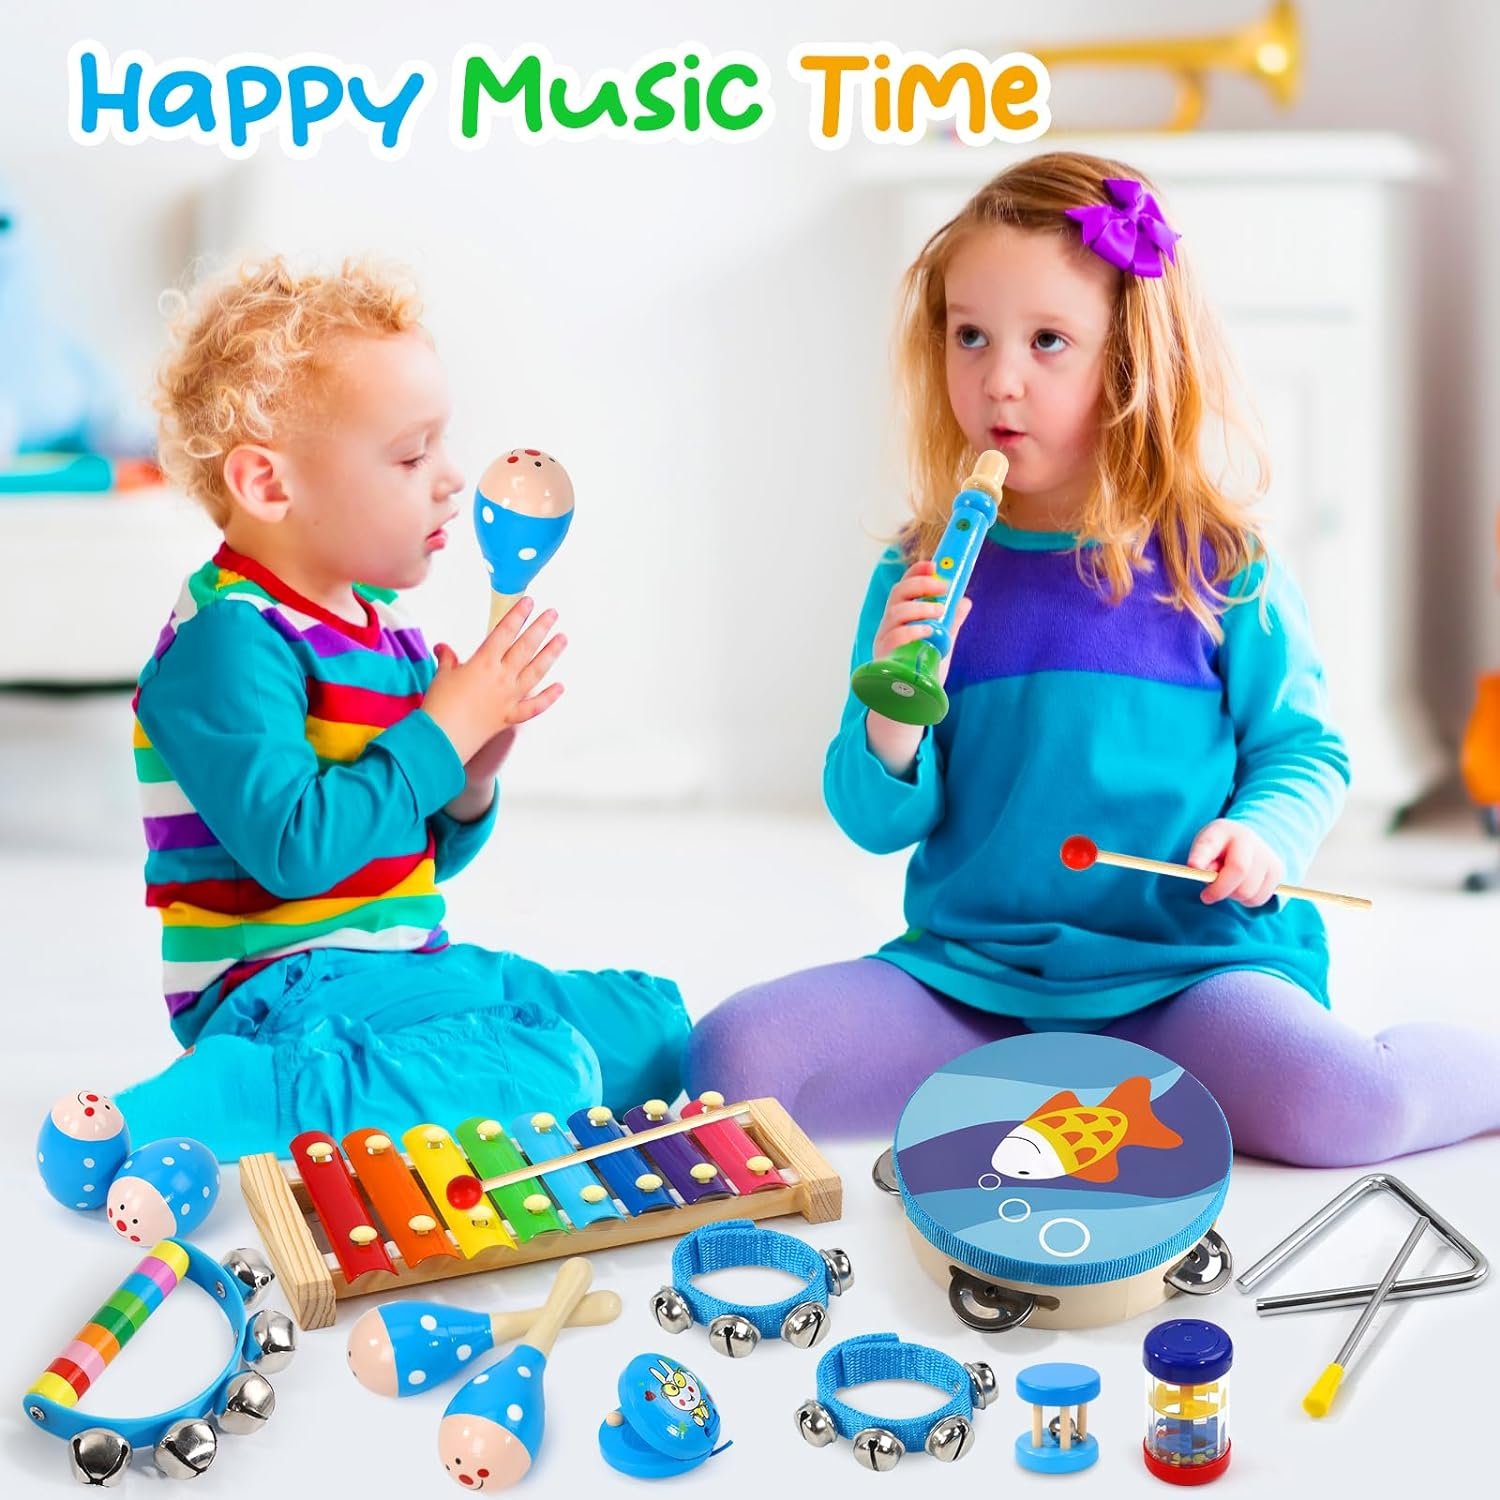 Raimy Kids Musical Instruments Set - Wooden Percussion Instruments Toy for Toddler Baby, Preschool Educational Music Toys for Boys and Girls with Carrying Bag (Blue)